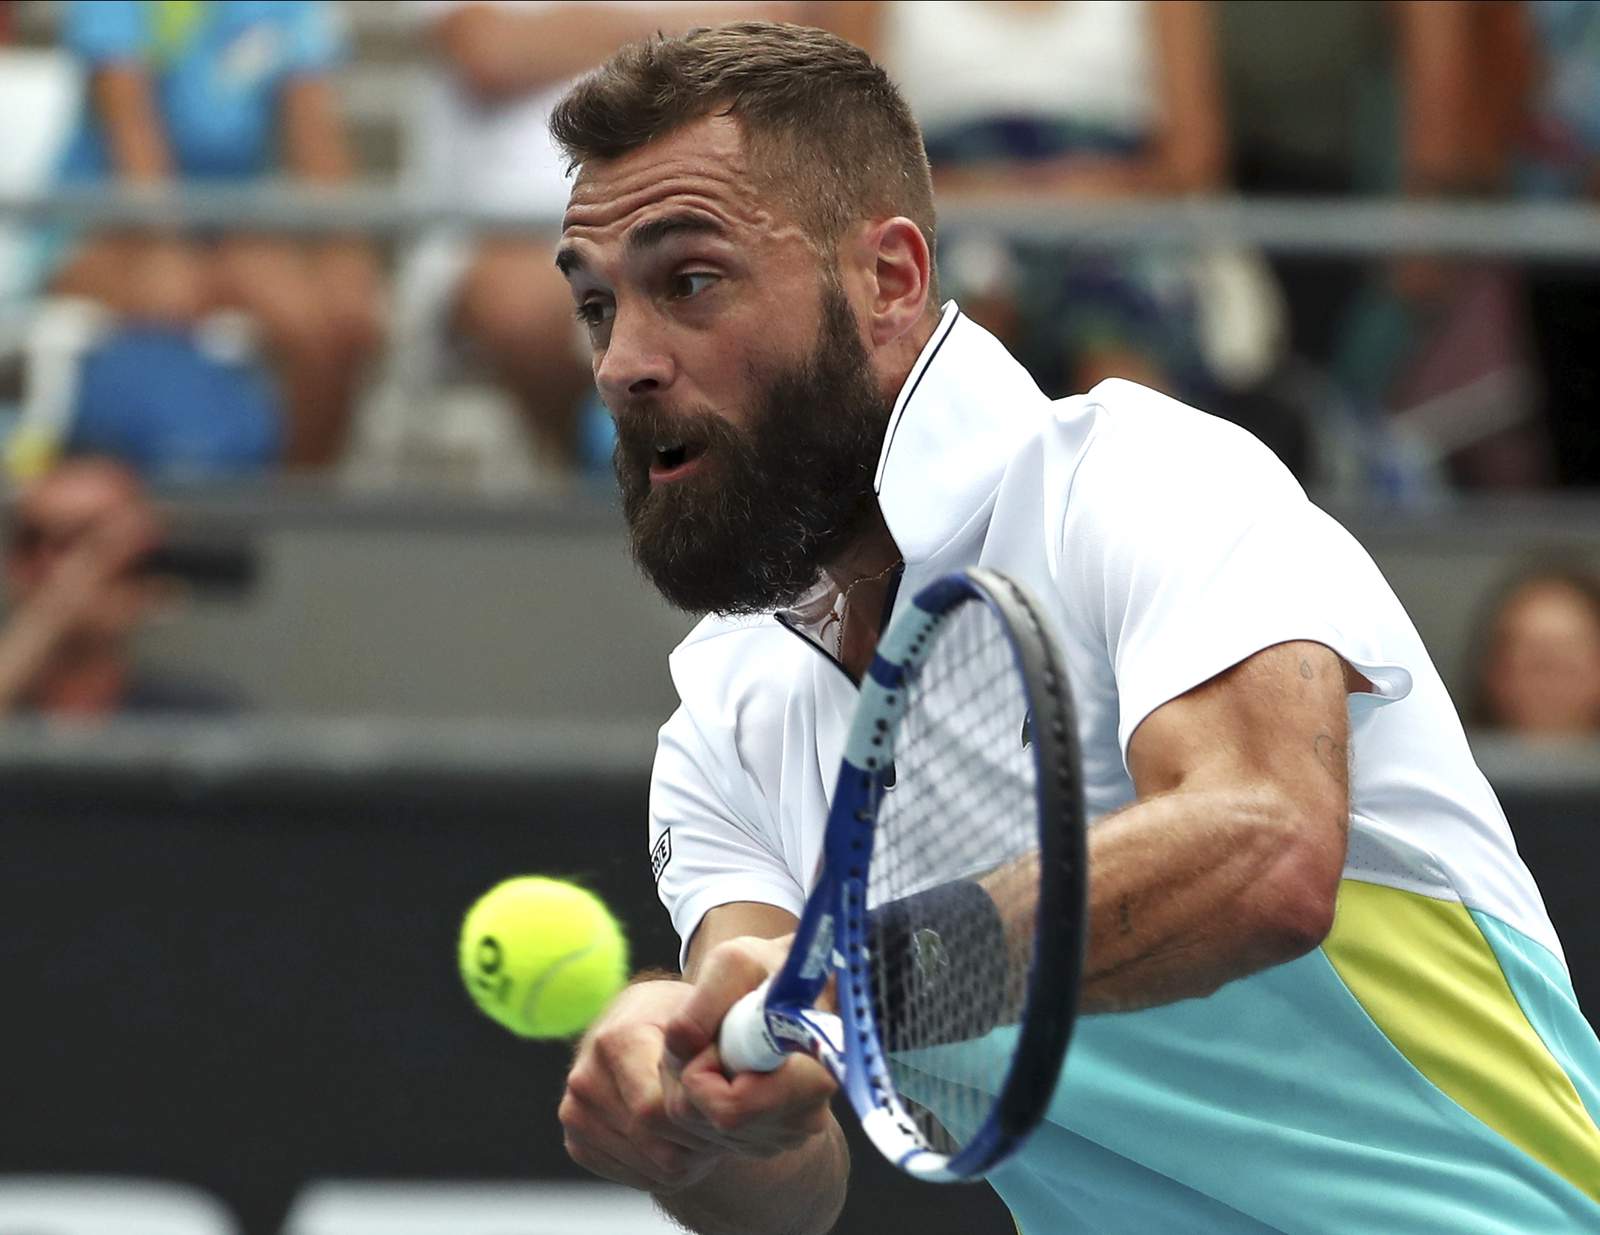 AP source: Paire out of US Open after positive COVID-19 test